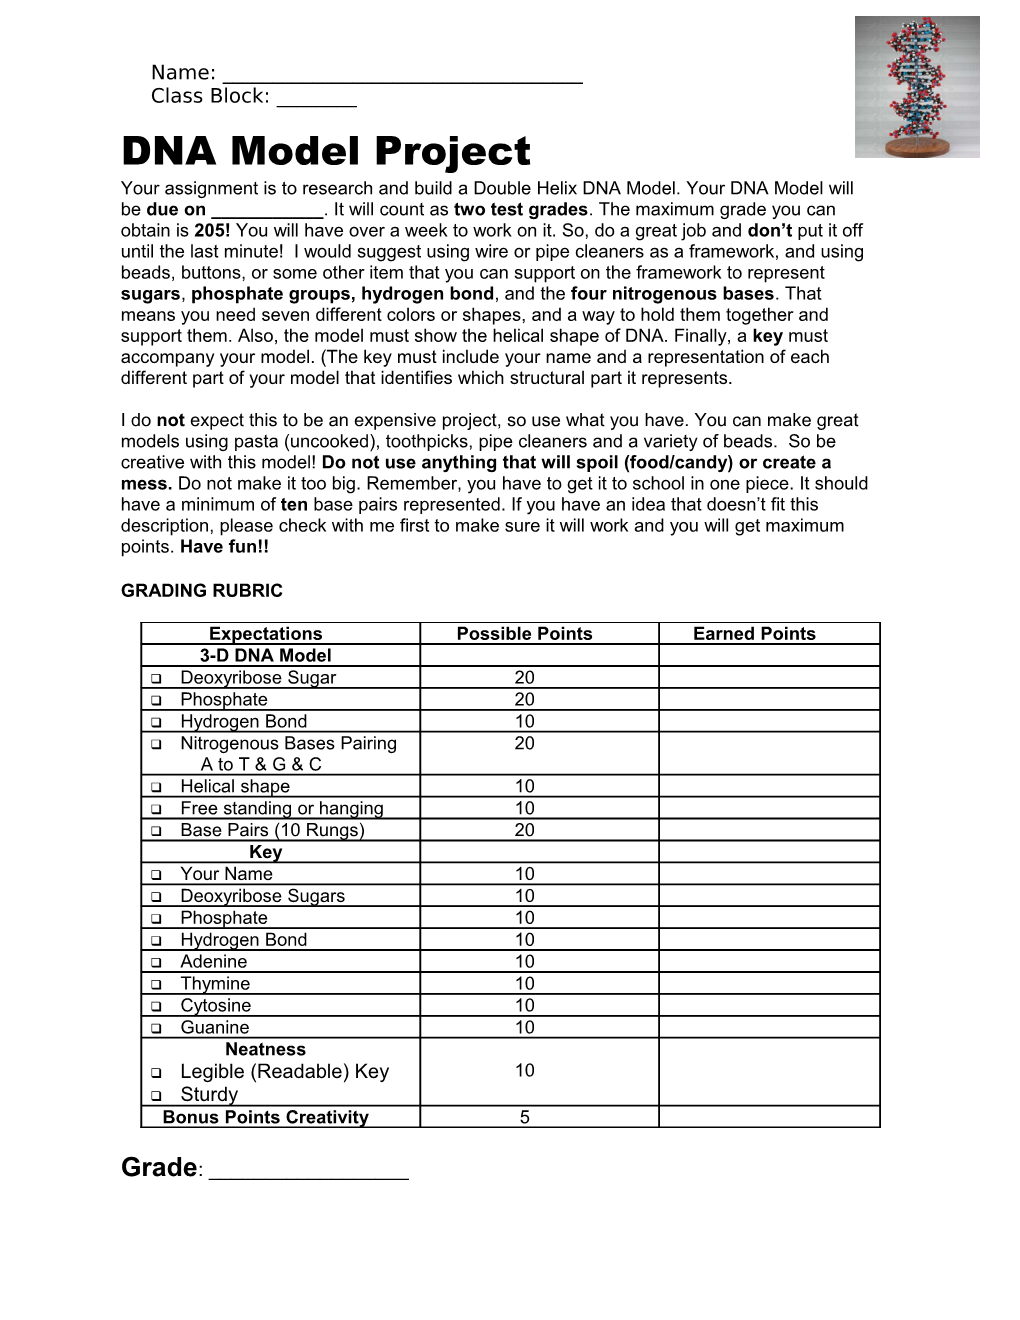 DNA Model Directions & Rubric